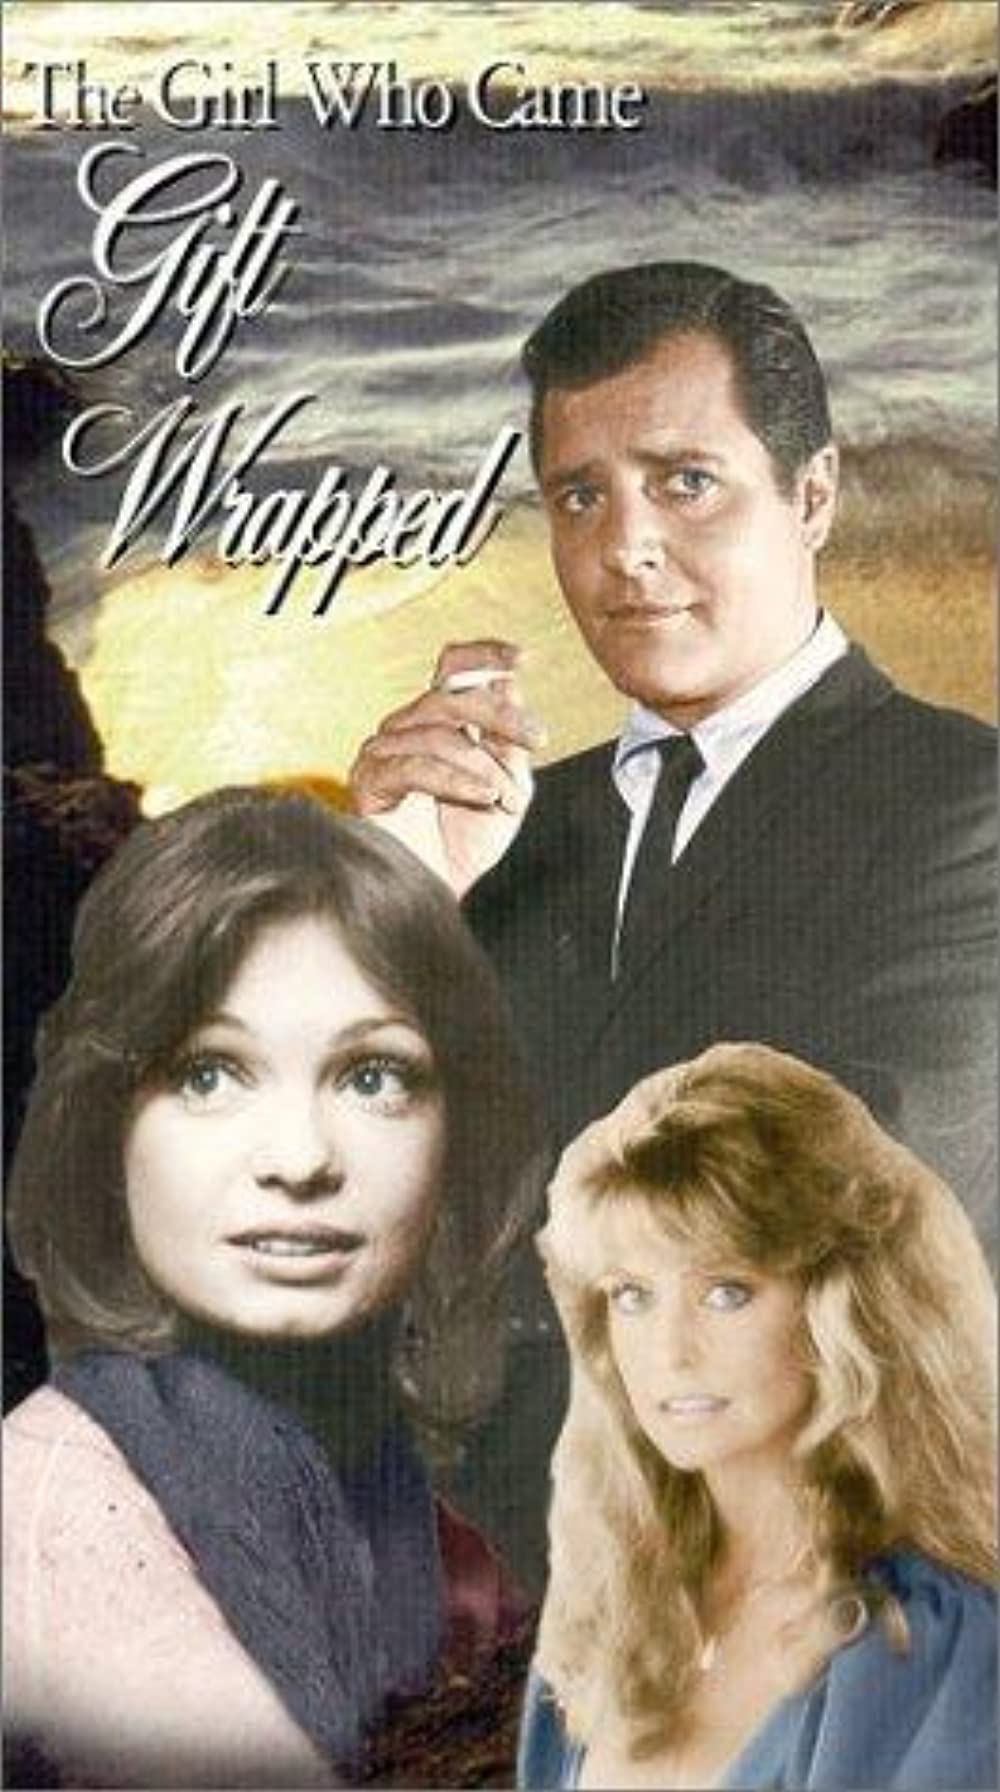 The Girl Who Came Gift-Wrapped Dvd (1974)